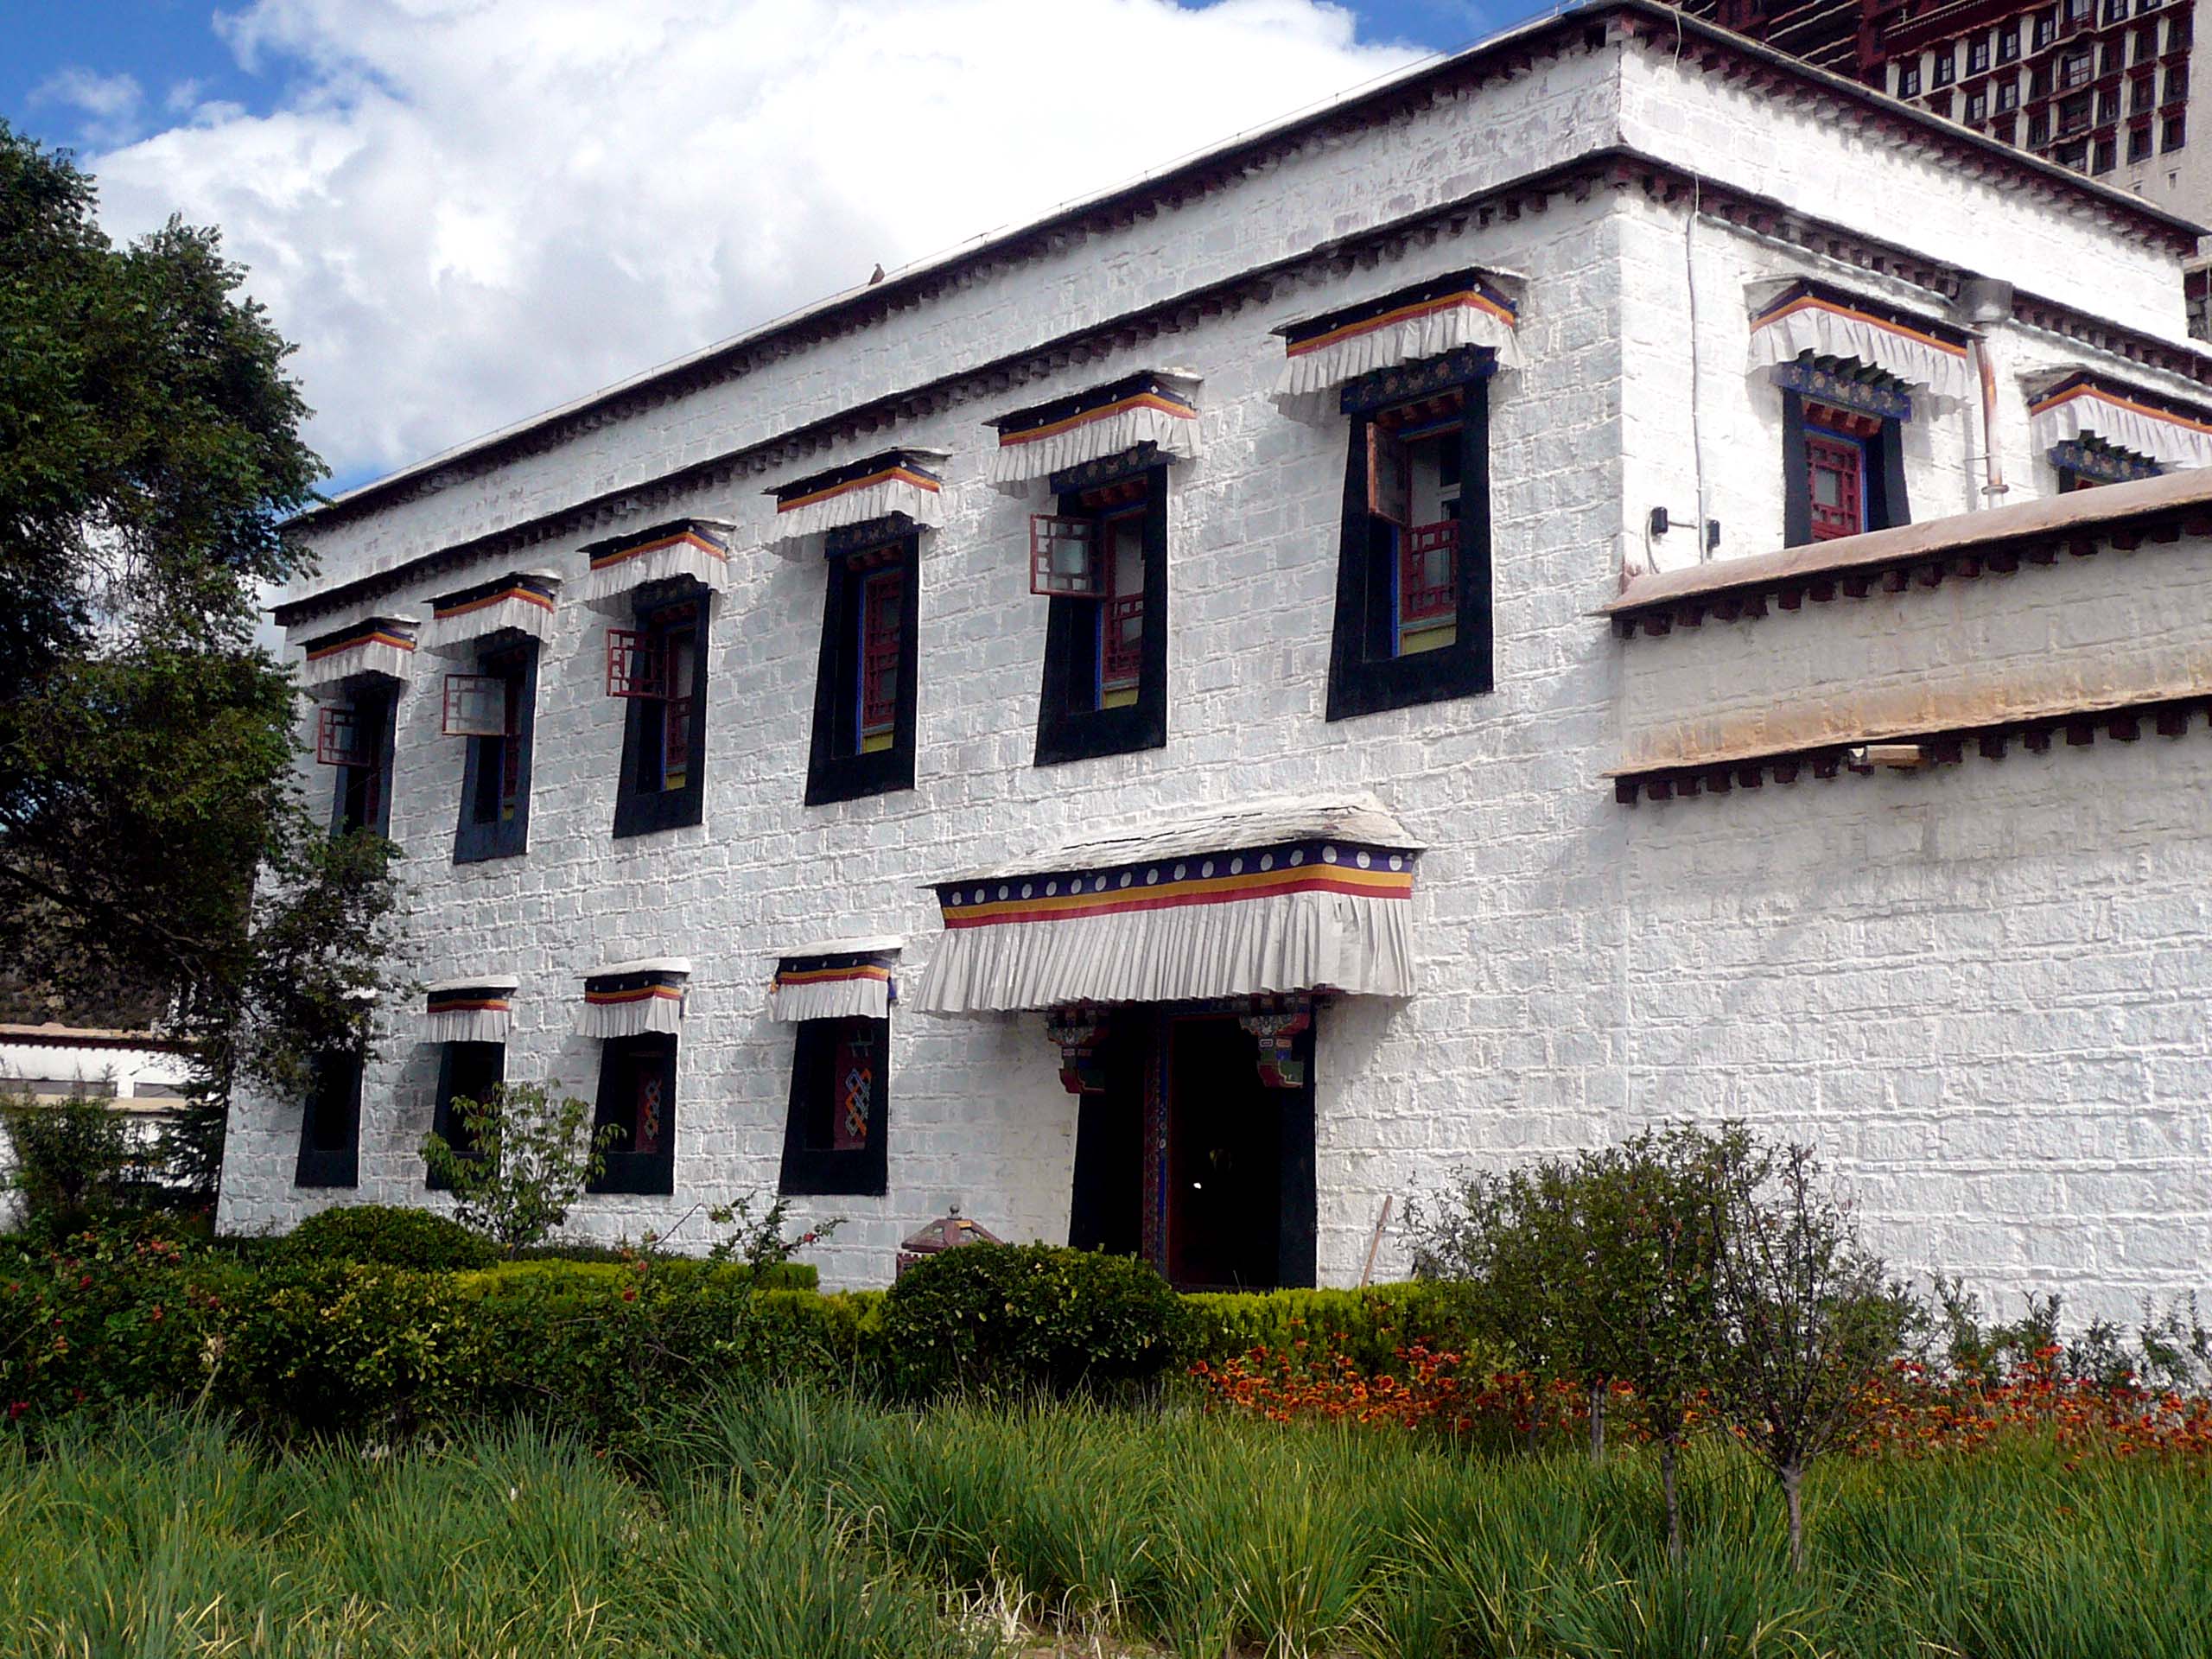 A typical level 1 administrative building within the protective walls of the Potala Palace